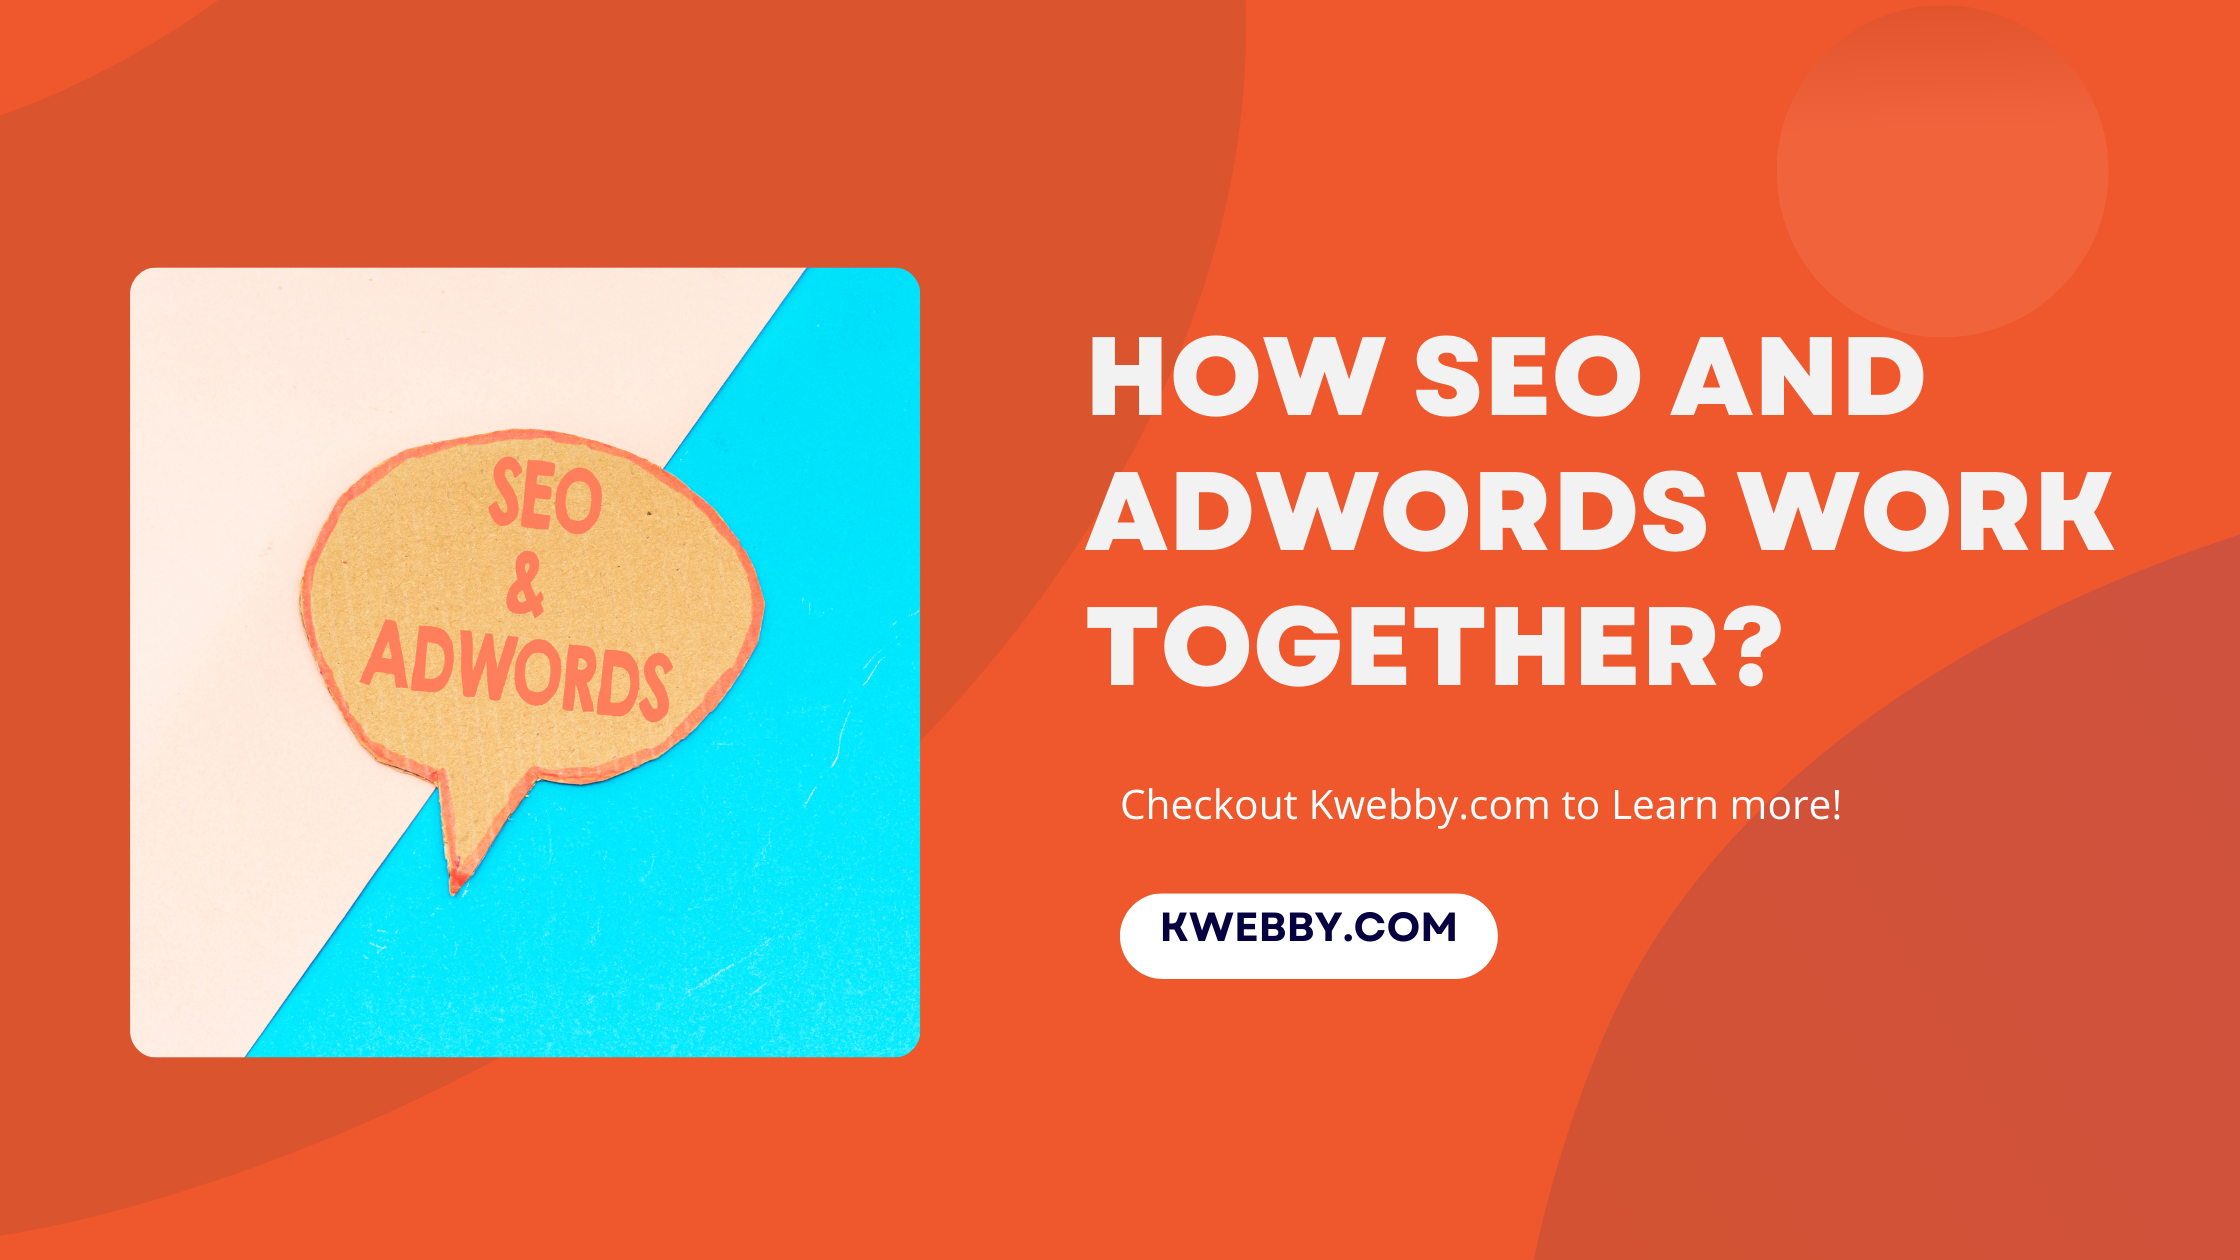 How SEO and Adwords work together? Let’s Find out